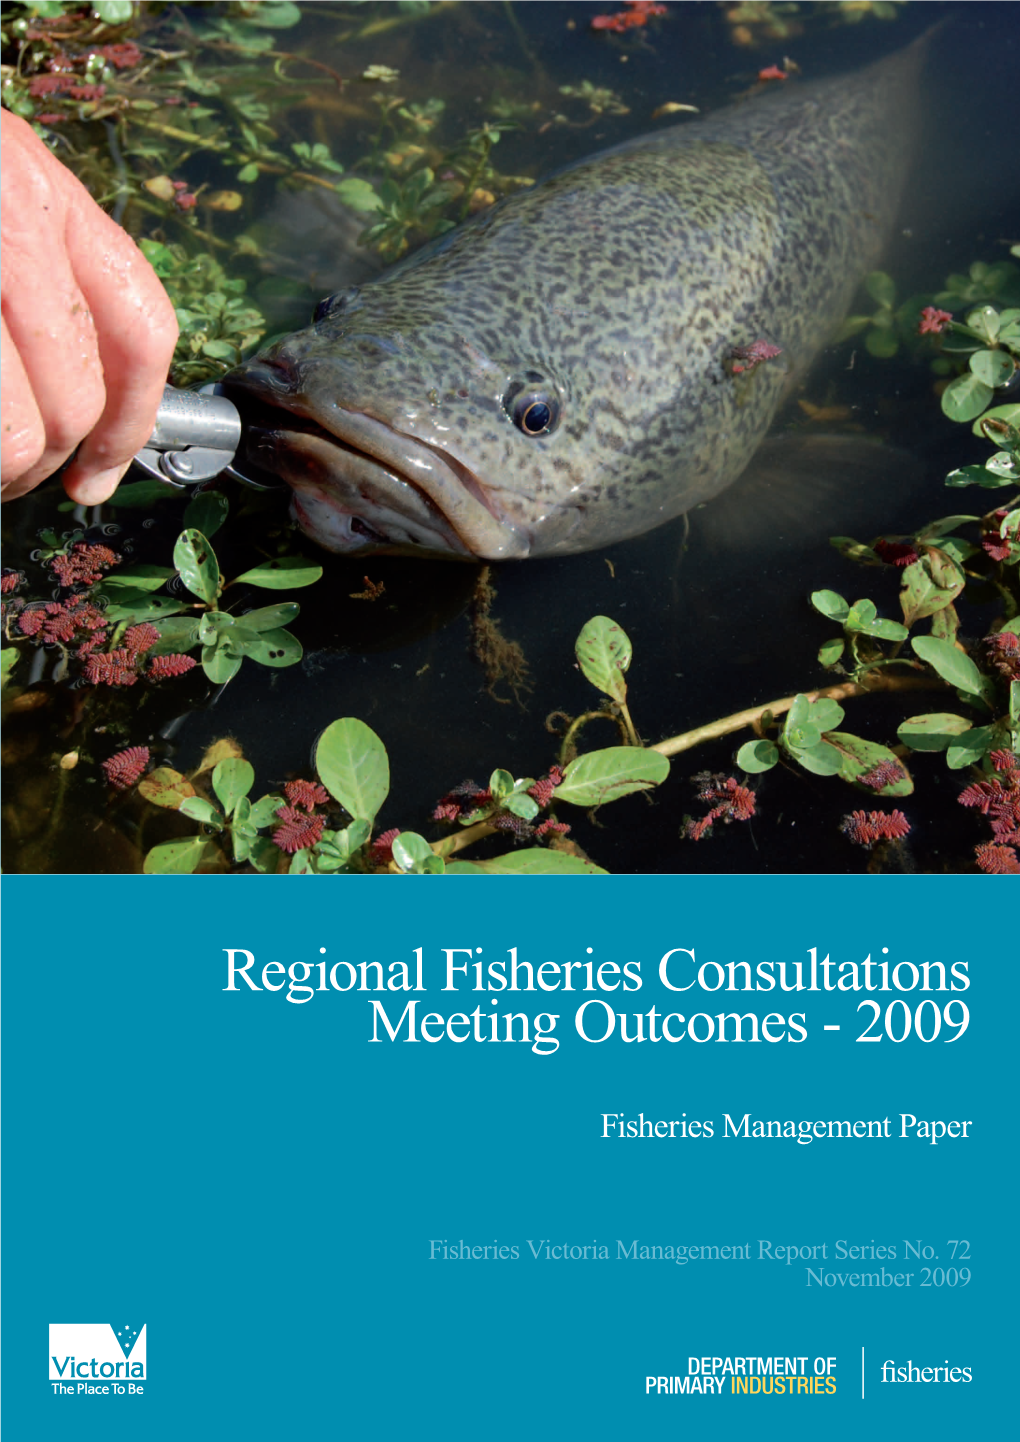 Regional Fisheries Consultations Meeting Outcomes - 2009